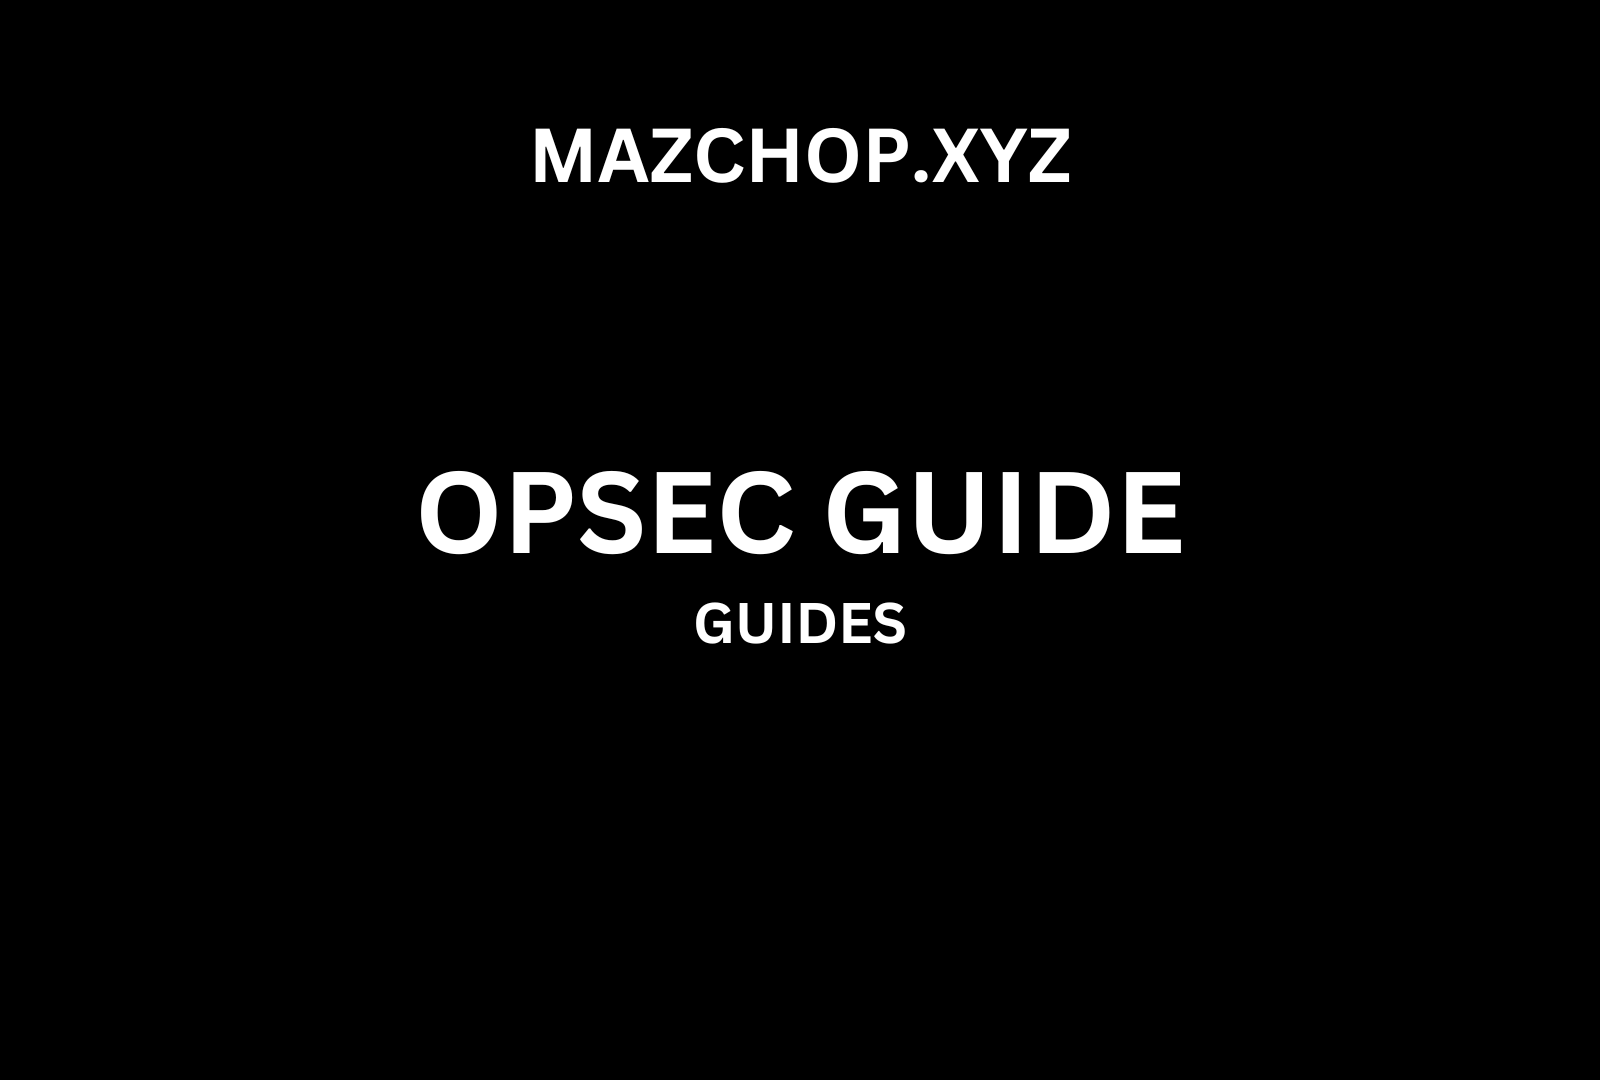 OPSEC/Security Guide